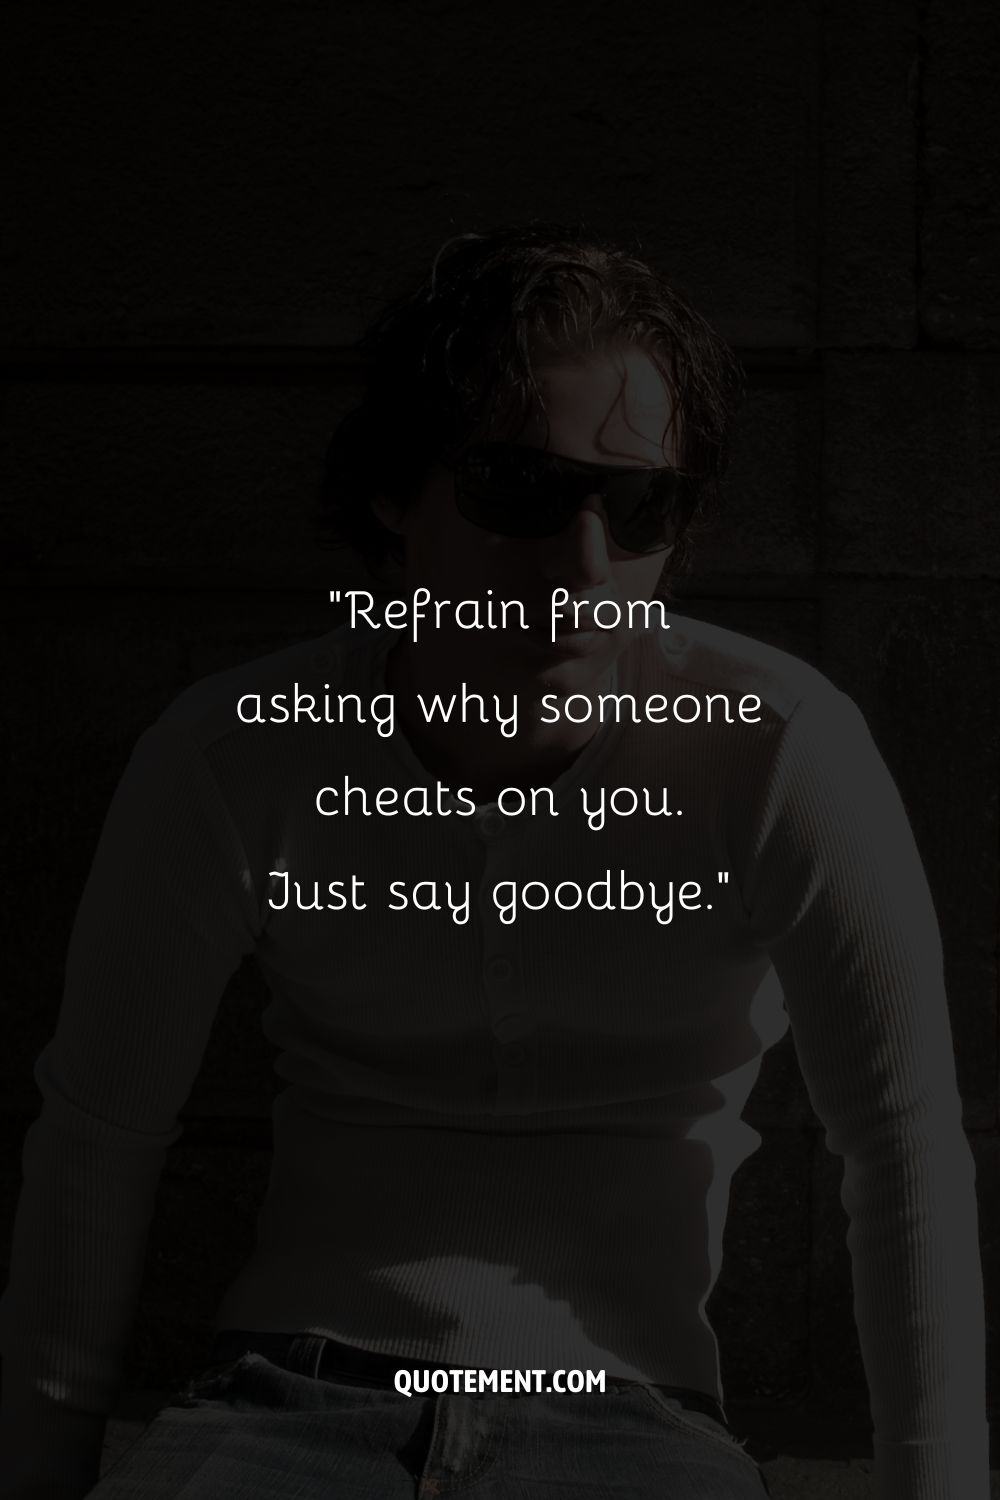 “Refrain from asking why someone cheats on you. Just say goodbye.”